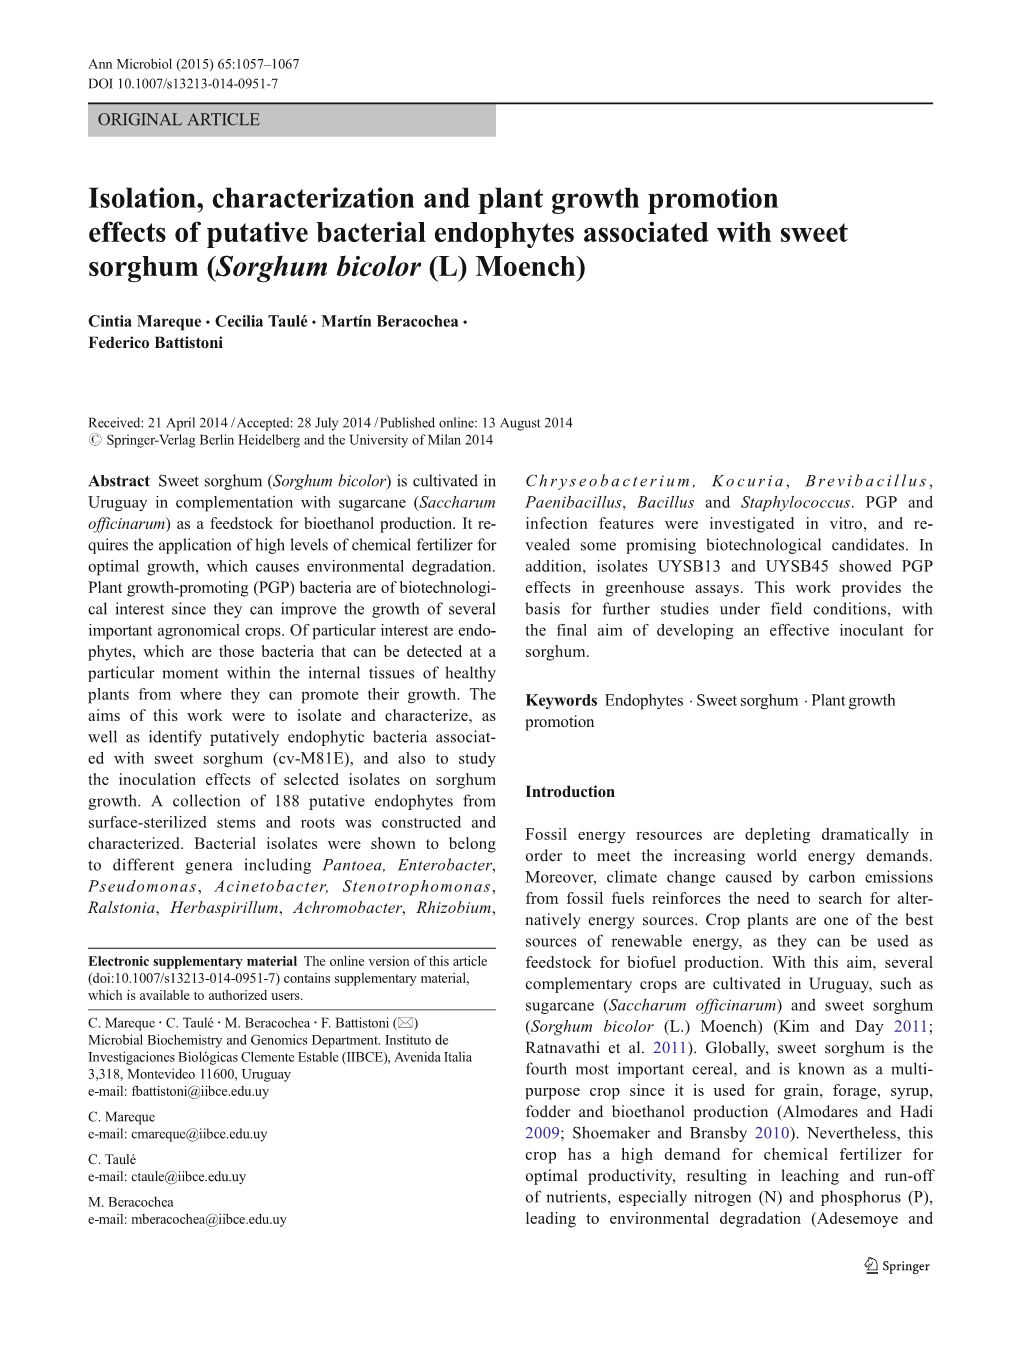 Isolation, Characterization and Plant Growth Promotion Effects of Putative Bacterial Endophytes Associated with Sweet Sorghum (Sorghum Bicolor (L) Moench)